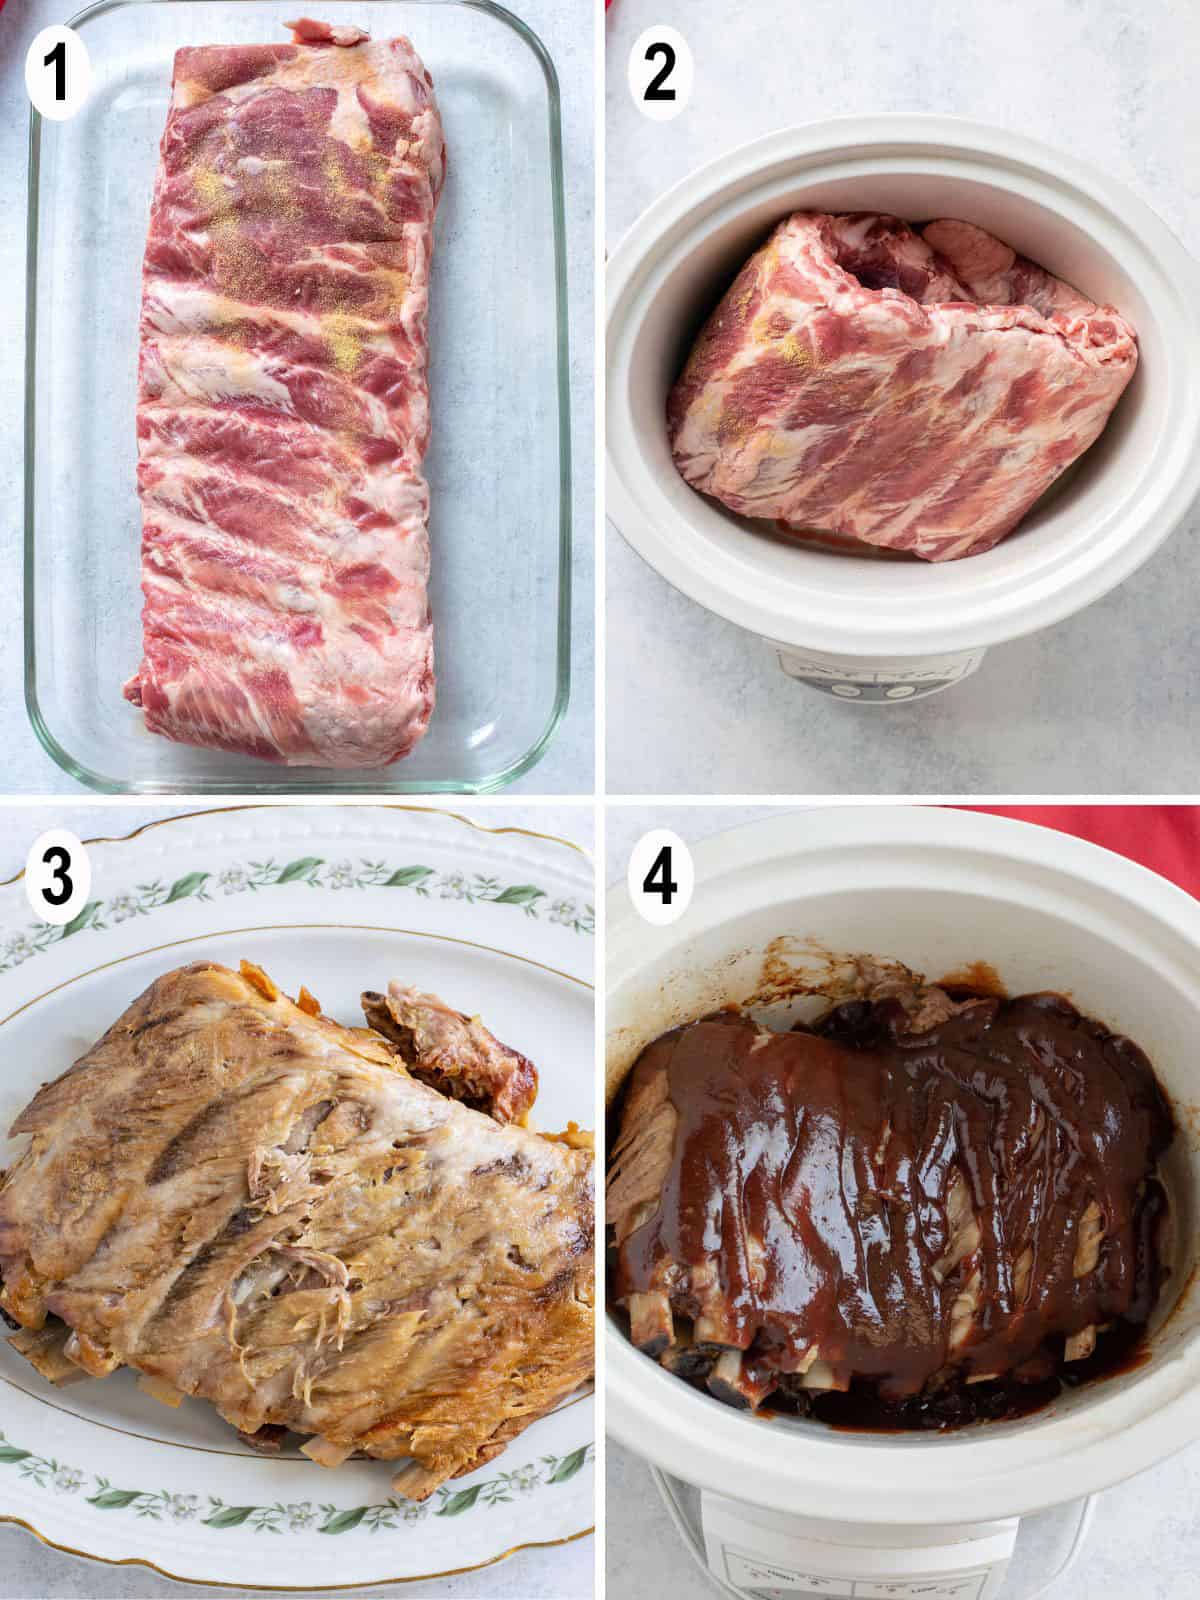 raw ribs in pan, crockpot, cooked, sauced.